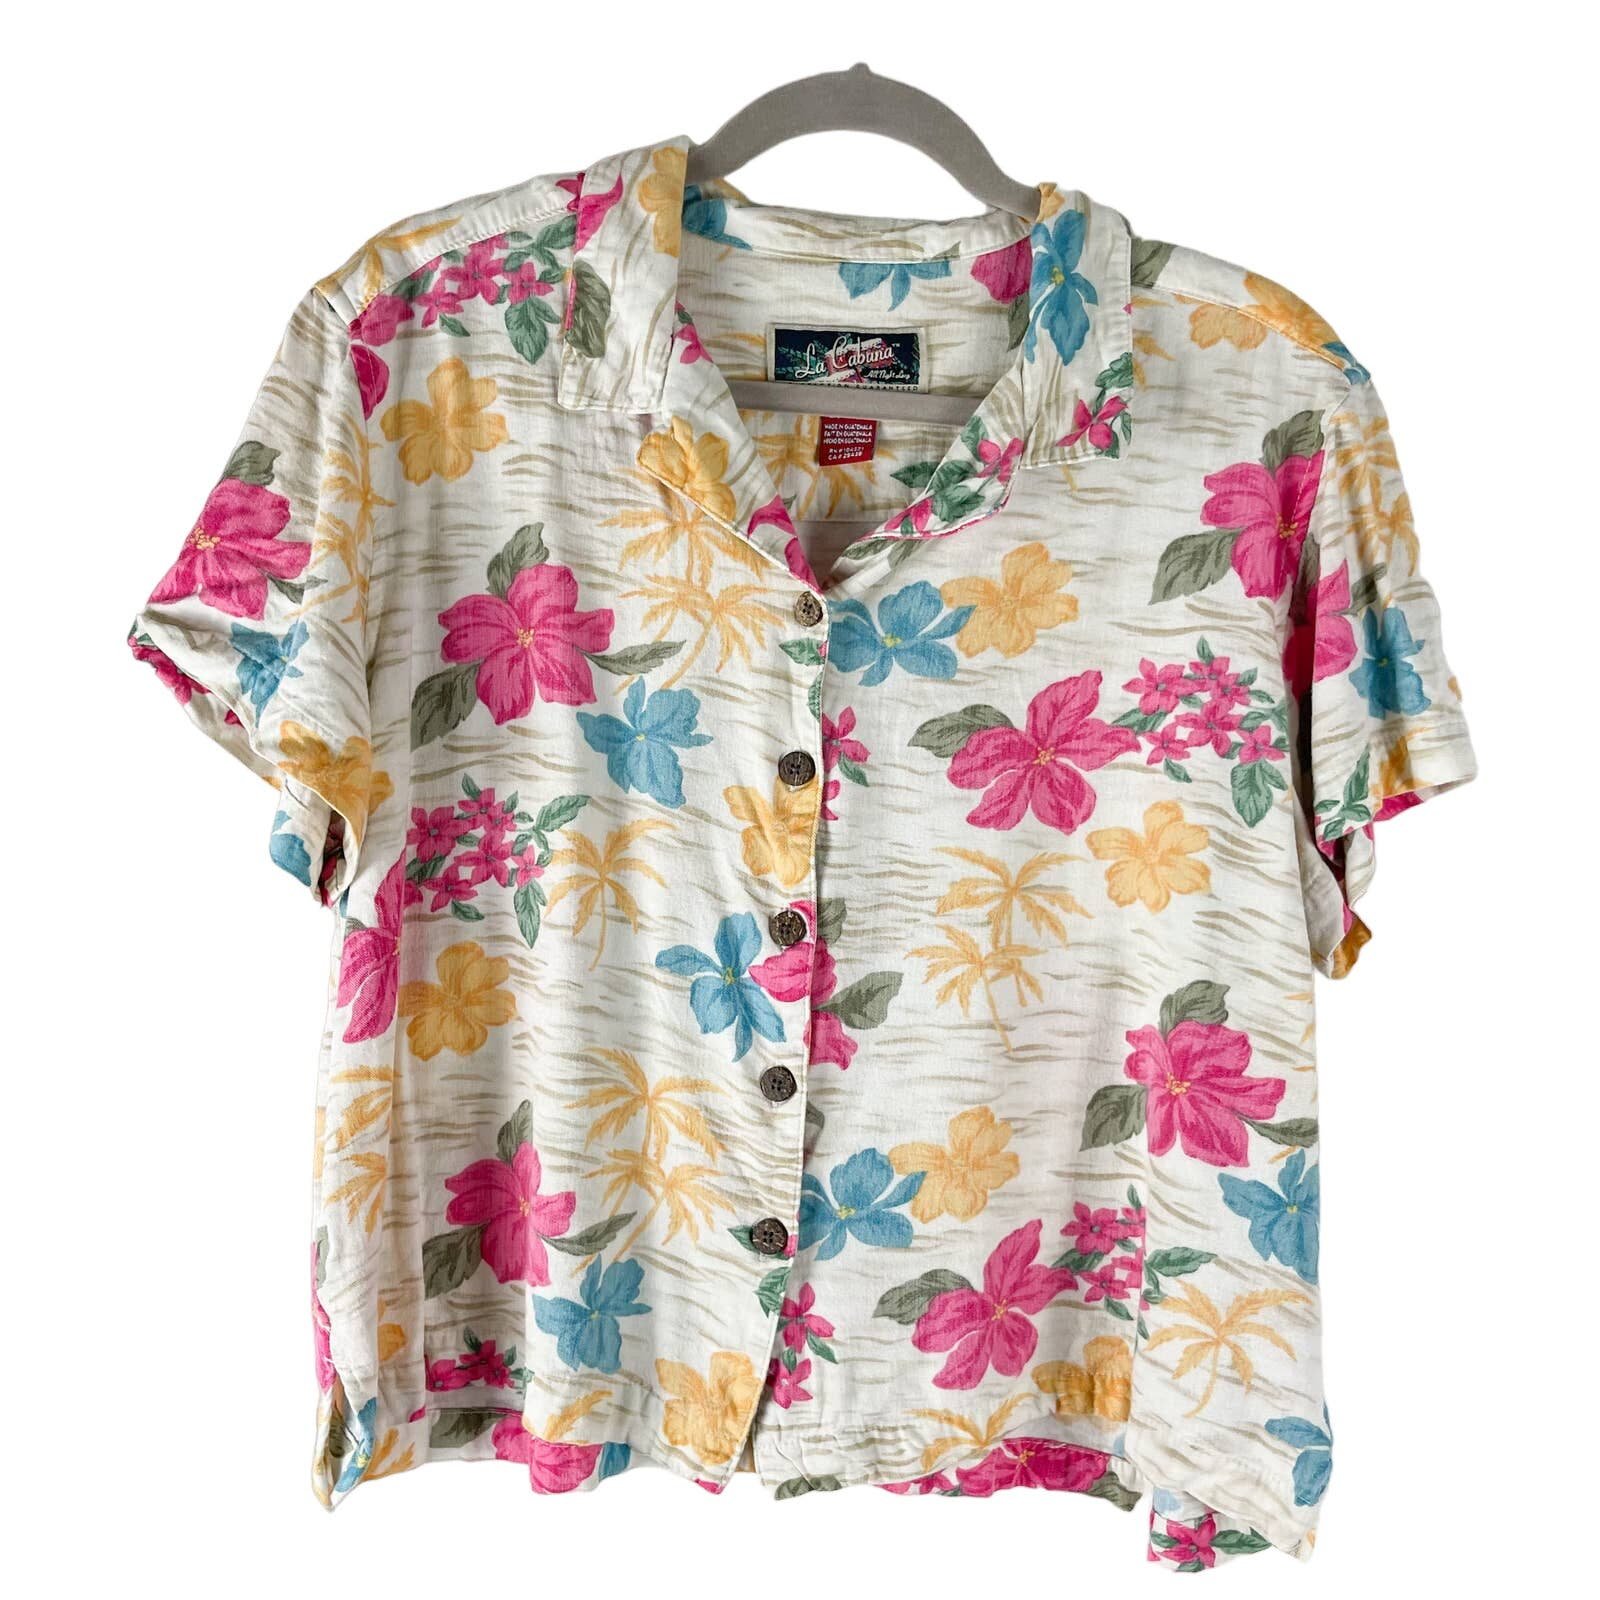 Latest  La Cabana Top Womens XL Cream Pink Floral Butto